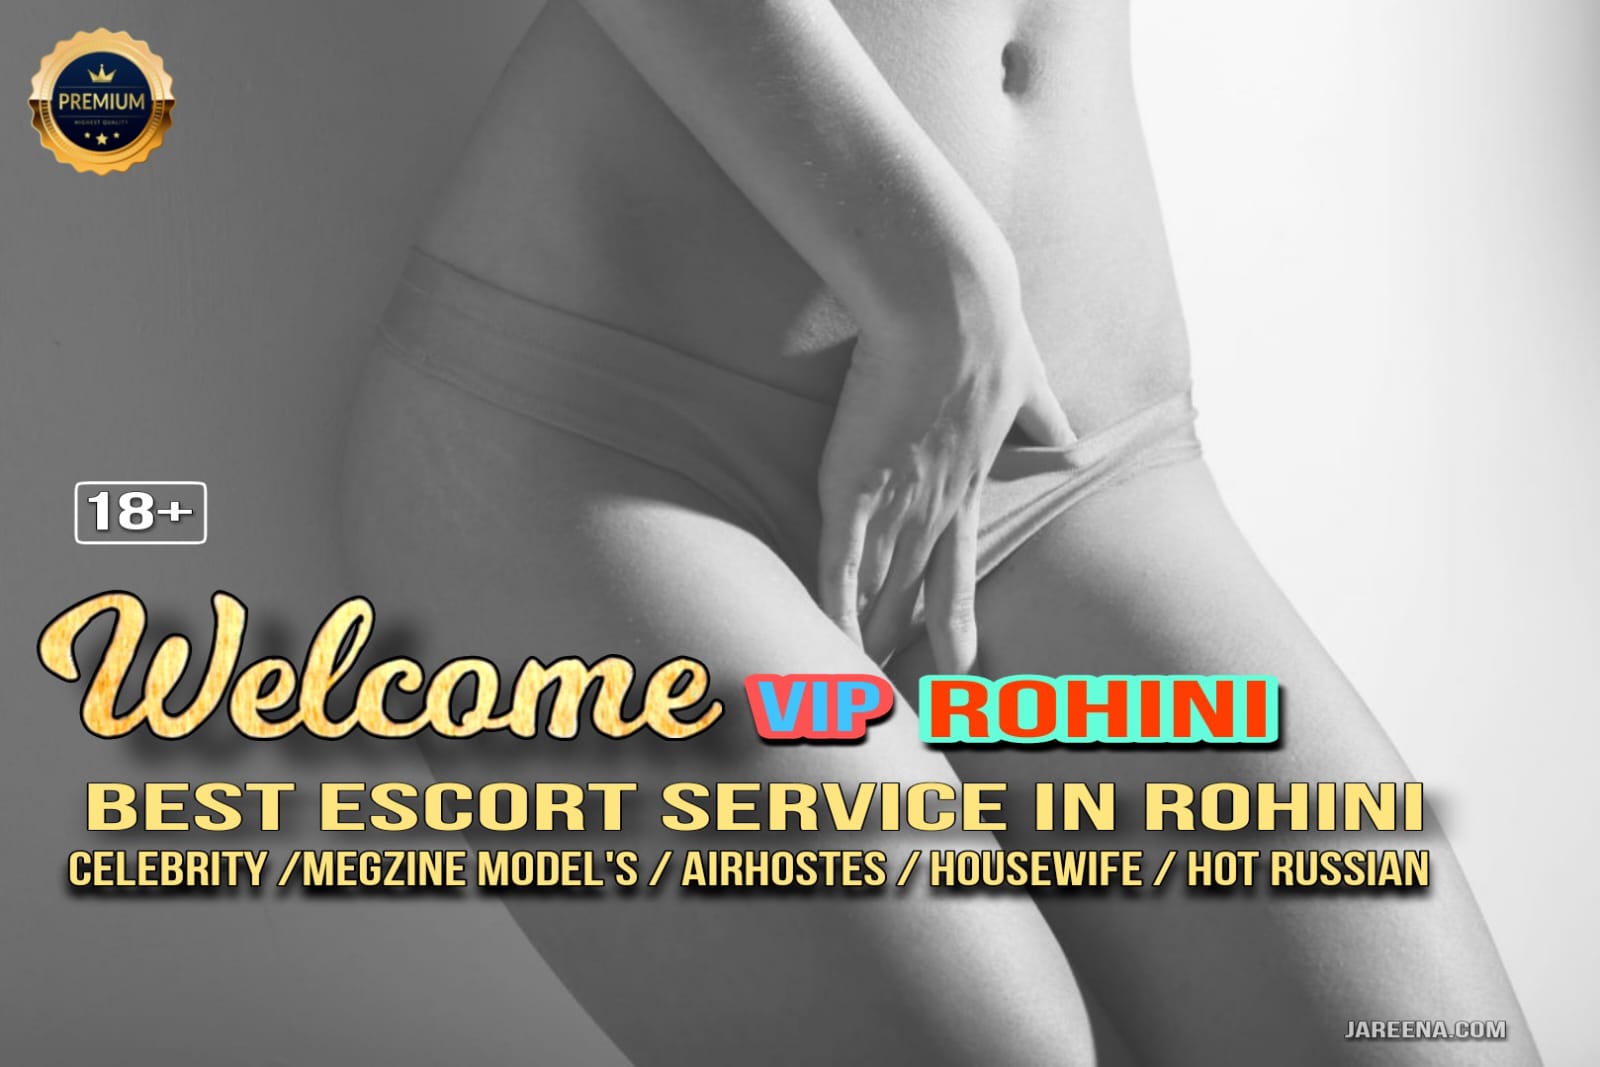 Escort Service In Rohini | Independent Escort call Girls Our Models as Call Girls in Rohini Escort are the holy messengers from paradise who've landed distinctly to pour all their affection on you. They may trigger you to really feel distinctive and deal with you want a King of Rohini West. Certainly, even your sweetheart or partner would rethink on the subject of going nicely past, but this isn’t what our feminine escorts in Rohini do. They're anxious about one factor only for instance to offer you with colossal sexual delight that takes your breath away, invigorates your physique and stimulates your spirit. Presently think about it, can your confederate do what all our beguiling Rohini escorts can do? Expectation you'll find the answer. Rohini Call Girls for Position Play and Relaxing Massages in Rohini East. Who doesn’t care to make their deserving of their recollections with Escorts in Rohini Est? There could be no person who can stop from such outlandish faux and again rub diversion gave by the most sultry and fine-looking Model Escort who provide you with what life is being with them. With any escorts in Rohini obtainable, life seems to be wonderful to such an extent that you simply gained’t wish to go away behind them, Hey nevertheless! There’s persistently next time. You may’t assist, but starting to look all starry eyed at their nicely proportioned look comprising of marvelous assets which can be there to siphon delight in your psyche when moved by your uncovered palms. No matter what you with them (licking, touching or kissing), merely don’t you change into overly energetic that you simply wind up inflicting a slight agony? You notice it could not be a sensible thought to squeeze that cute minimal pinkish tit somewhat exhausting. Since that may kill your girl and you can’t bear to do as such. Be delicate with them and deal with them proper and you'll wind up being handled like a King.